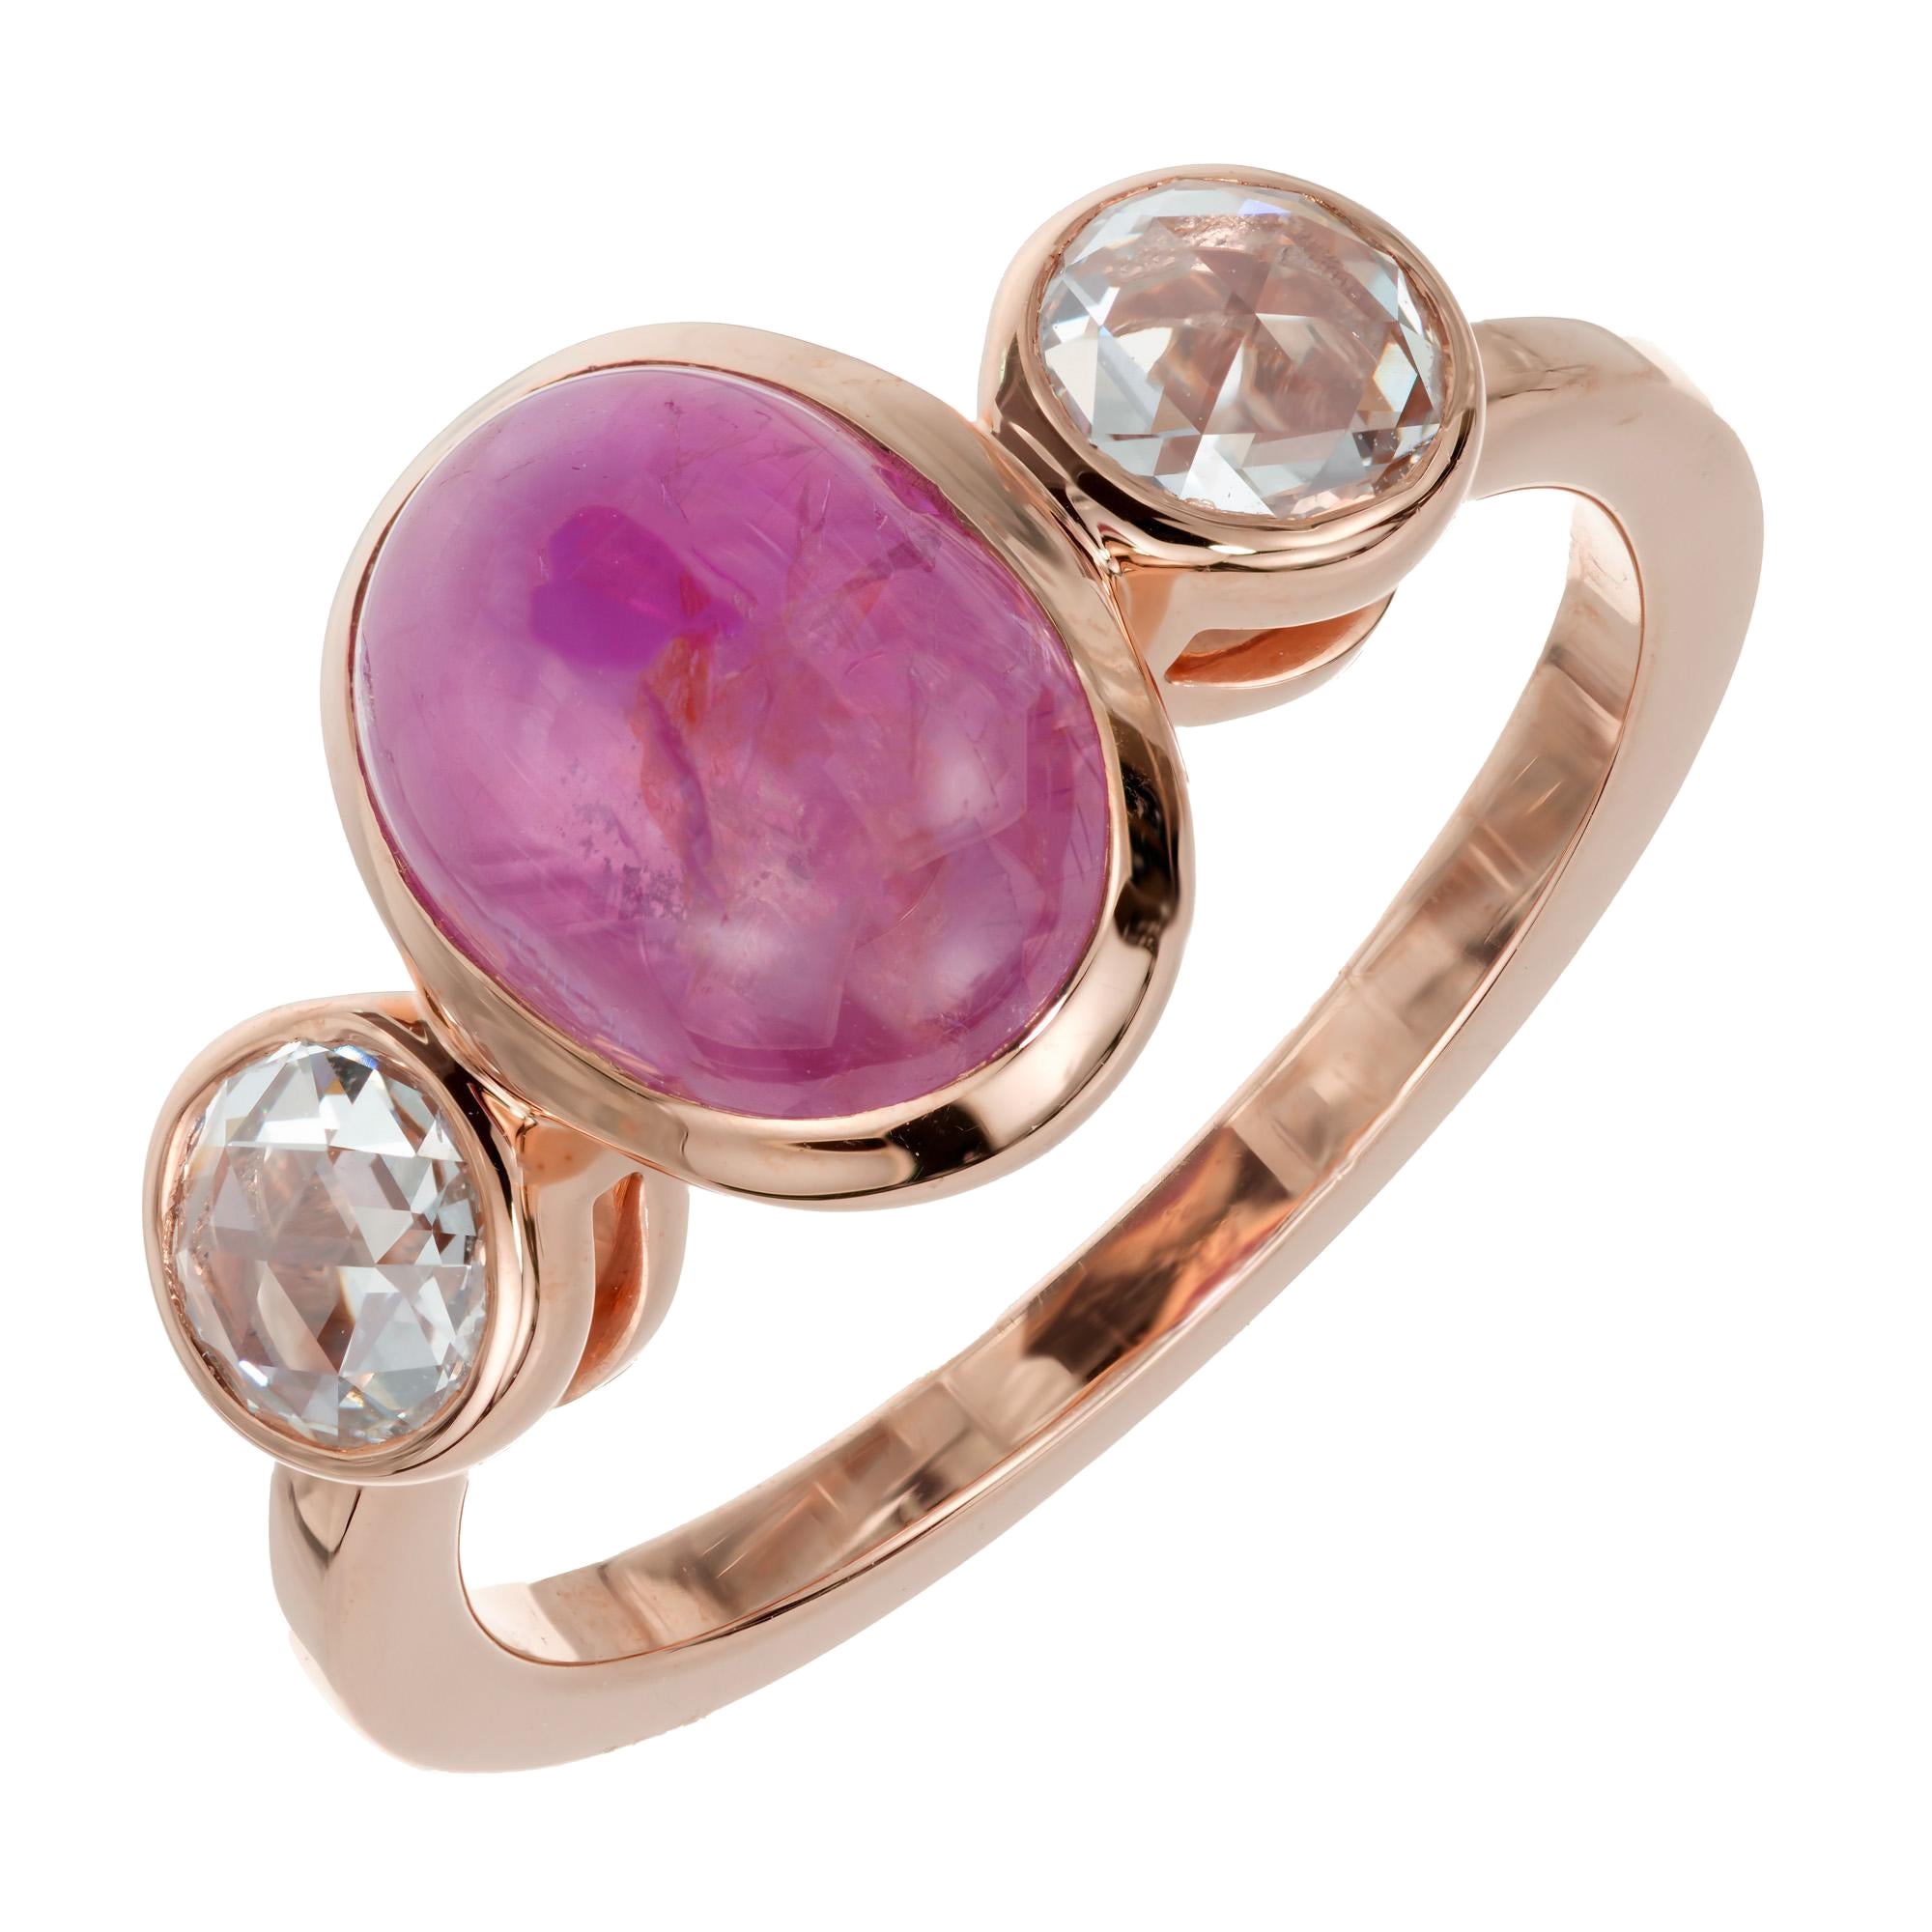 Peter Suchy GIA Certified 4.51 Star Sapphire Diamond Rose Gold Ring